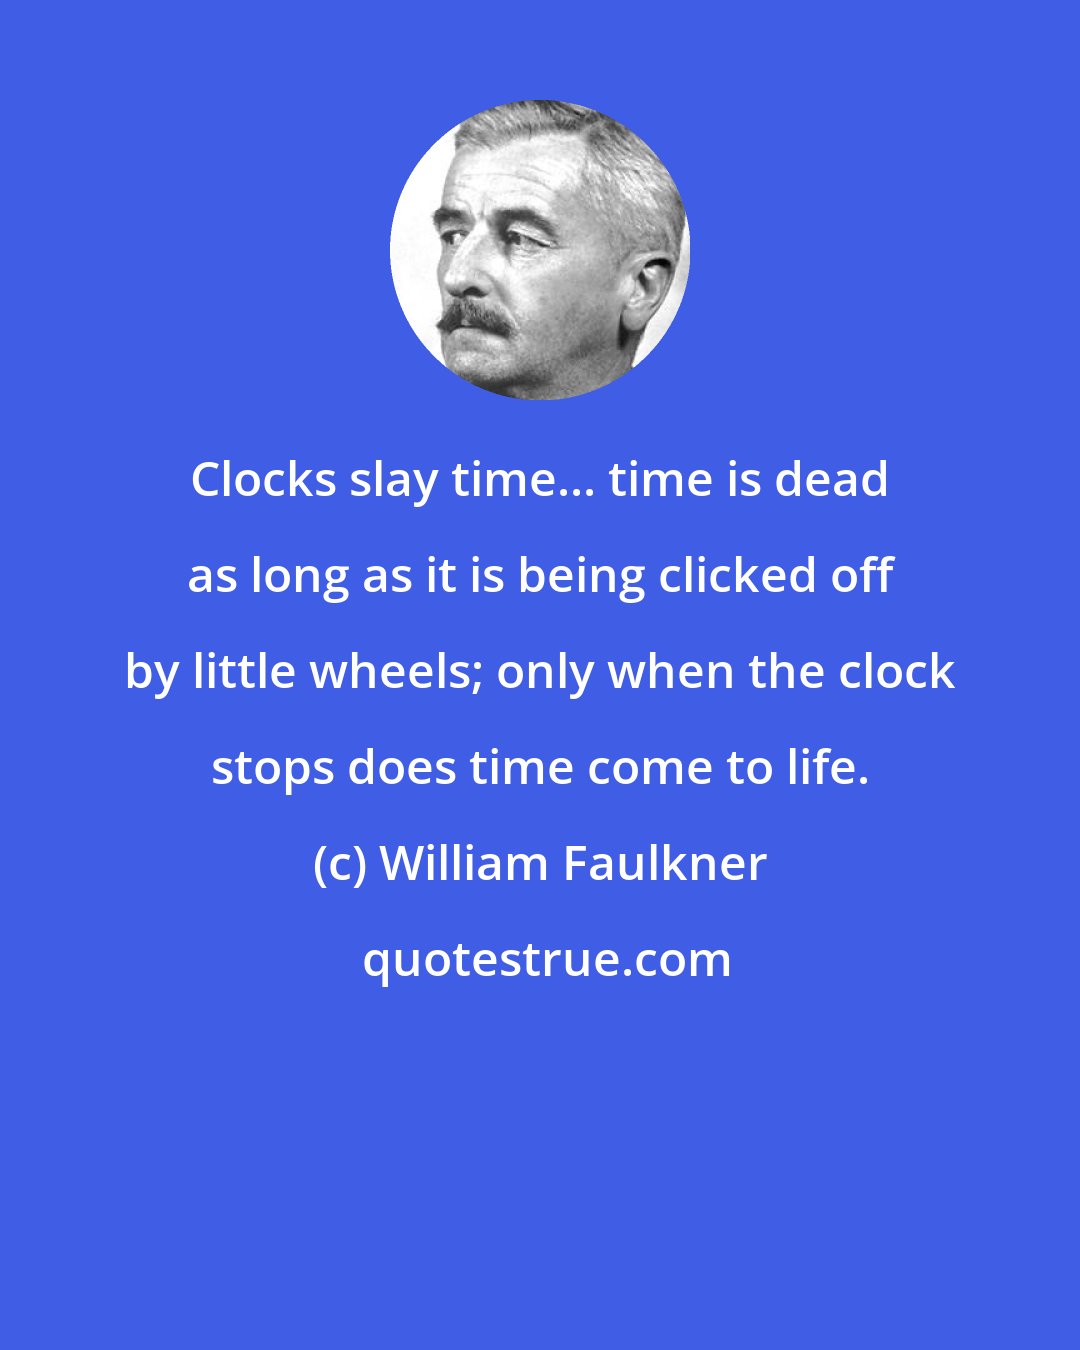 William Faulkner: Clocks slay time... time is dead as long as it is being clicked off by little wheels; only when the clock stops does time come to life.